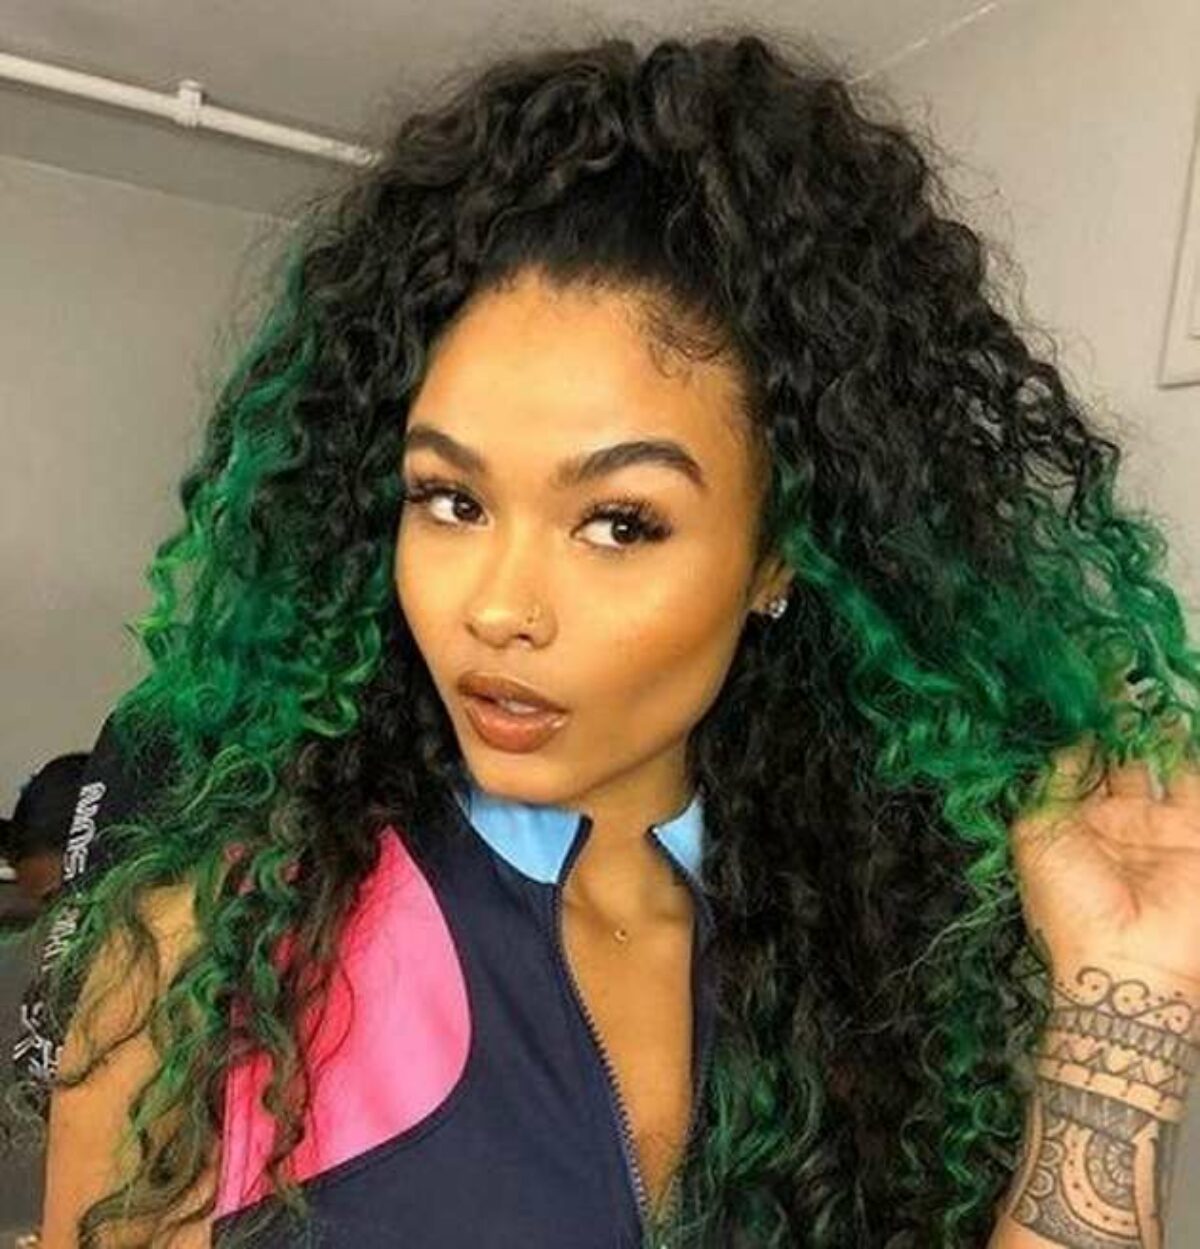 India Westbrooks Age, Net Worth, Wiki, Height and More 2022 - The Personage